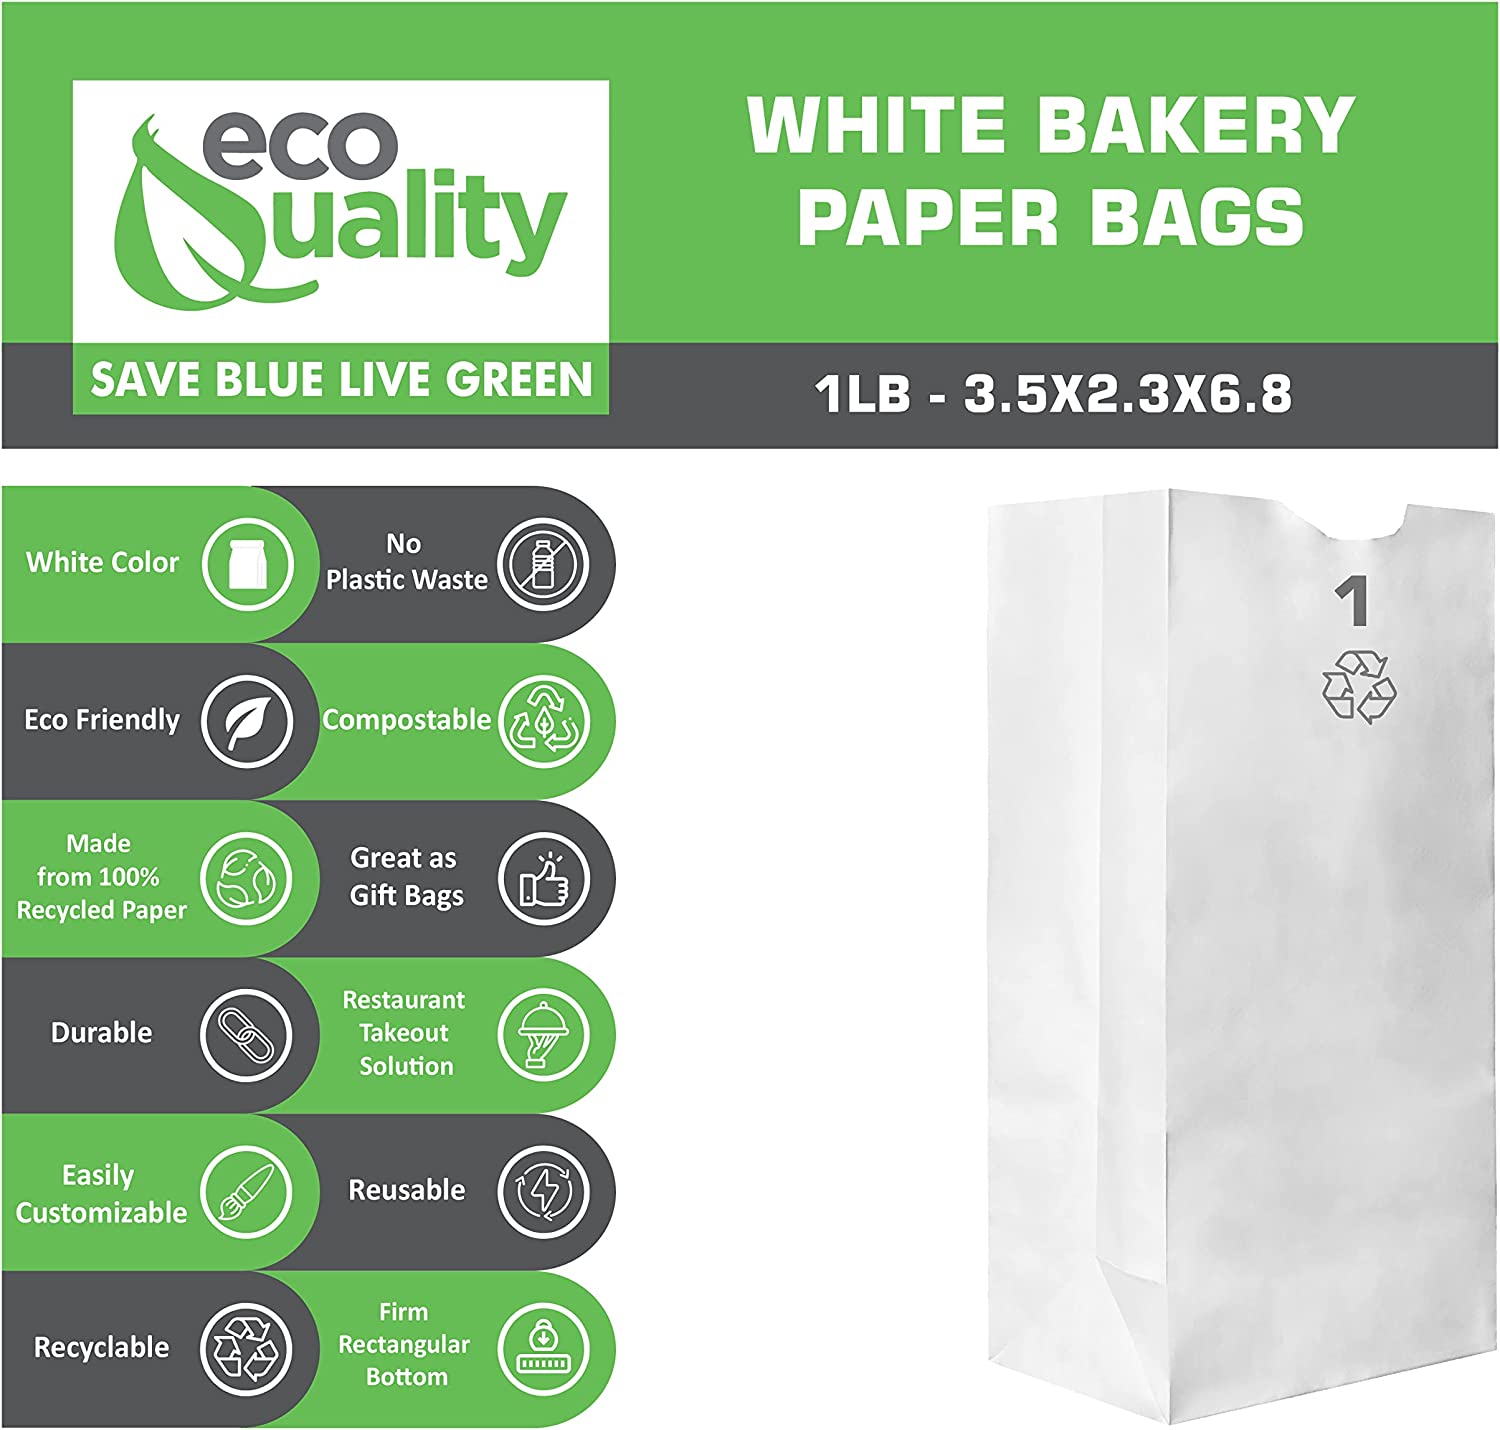 disposable bag White Paper Bags white Paper Shopping Bags foldable paper bag catering bags white kraft paper bag 1 pound candy bag snack bag gift bags DIY Bags arts and craft Sandwich Bag white paper bag party favor bag lunch bag togo bag takeout bag Restaurant supplies paper garbage bags Kraft Paper Bags kraft grocery bags Household Supplies